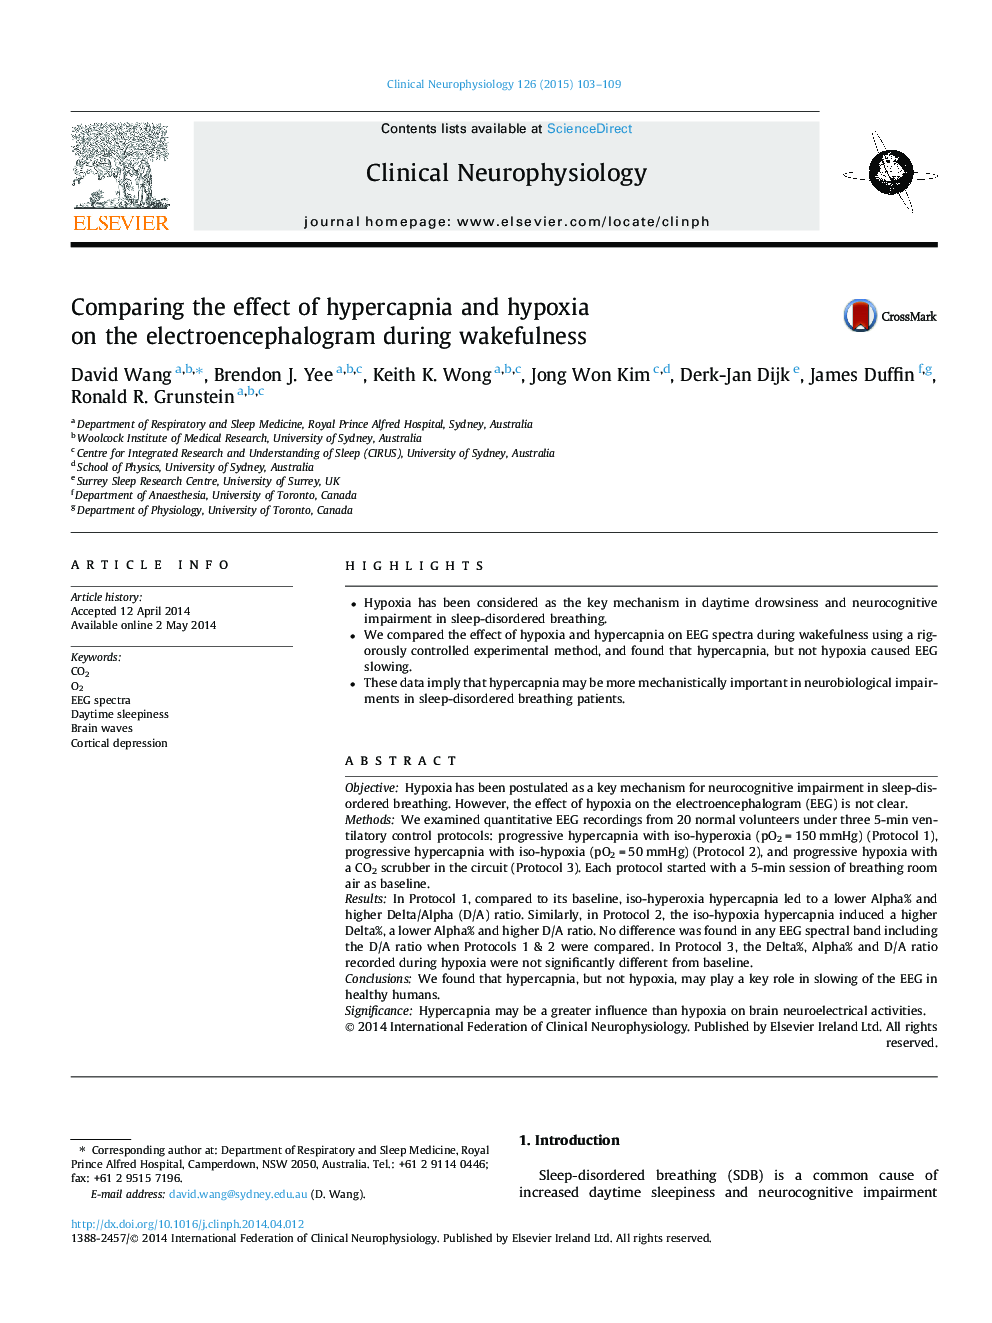 Comparing the effect of hypercapnia and hypoxia on the electroencephalogram during wakefulness